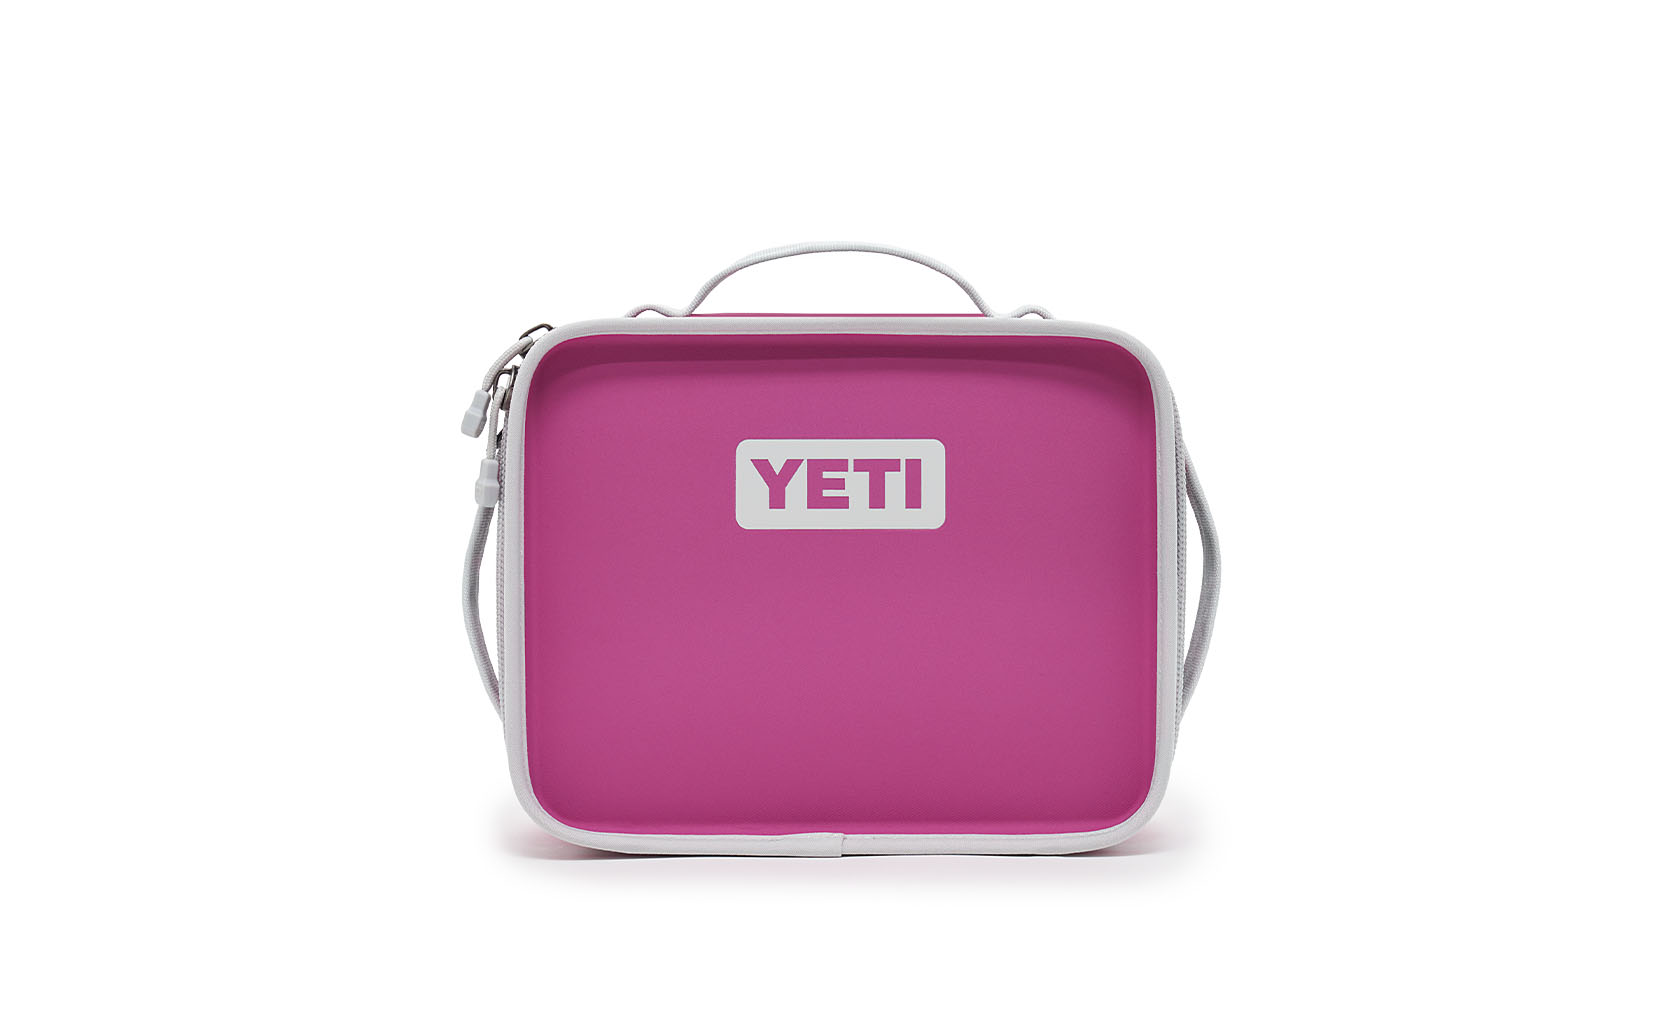 https://www.yeti.com/on/demandware.static/-/Sites-masterCatalog_Yeti/default/dwdd8336a8/images/pdp-Daytrip/lunch-box/Prickly-Pear-Pink/200616-Lunch%20Box-Front-Prickly-Pear-Pink-1680x1024.jpg